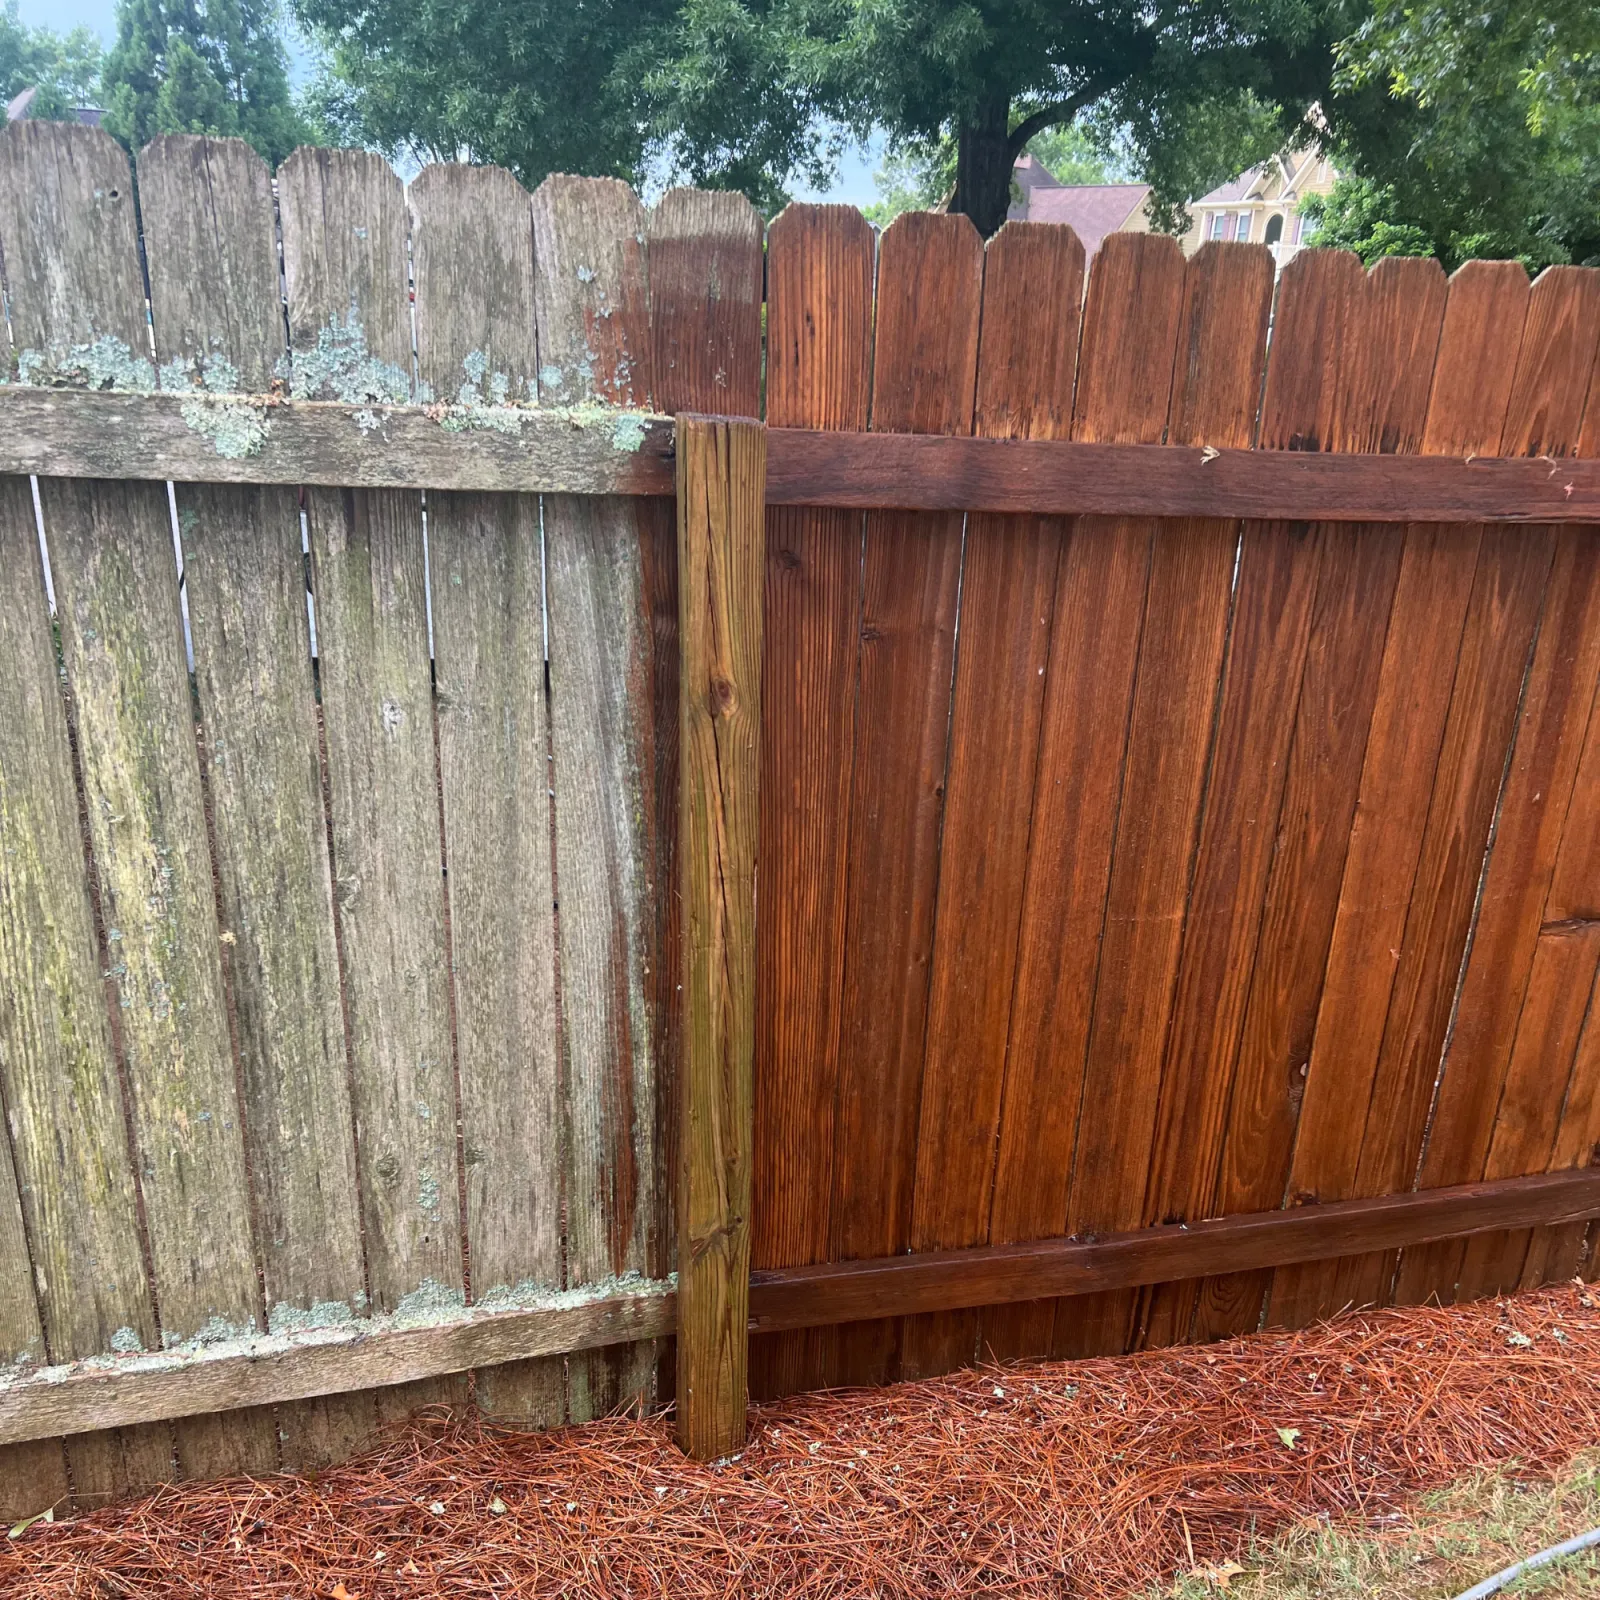 a wooden fence with a wooden gate